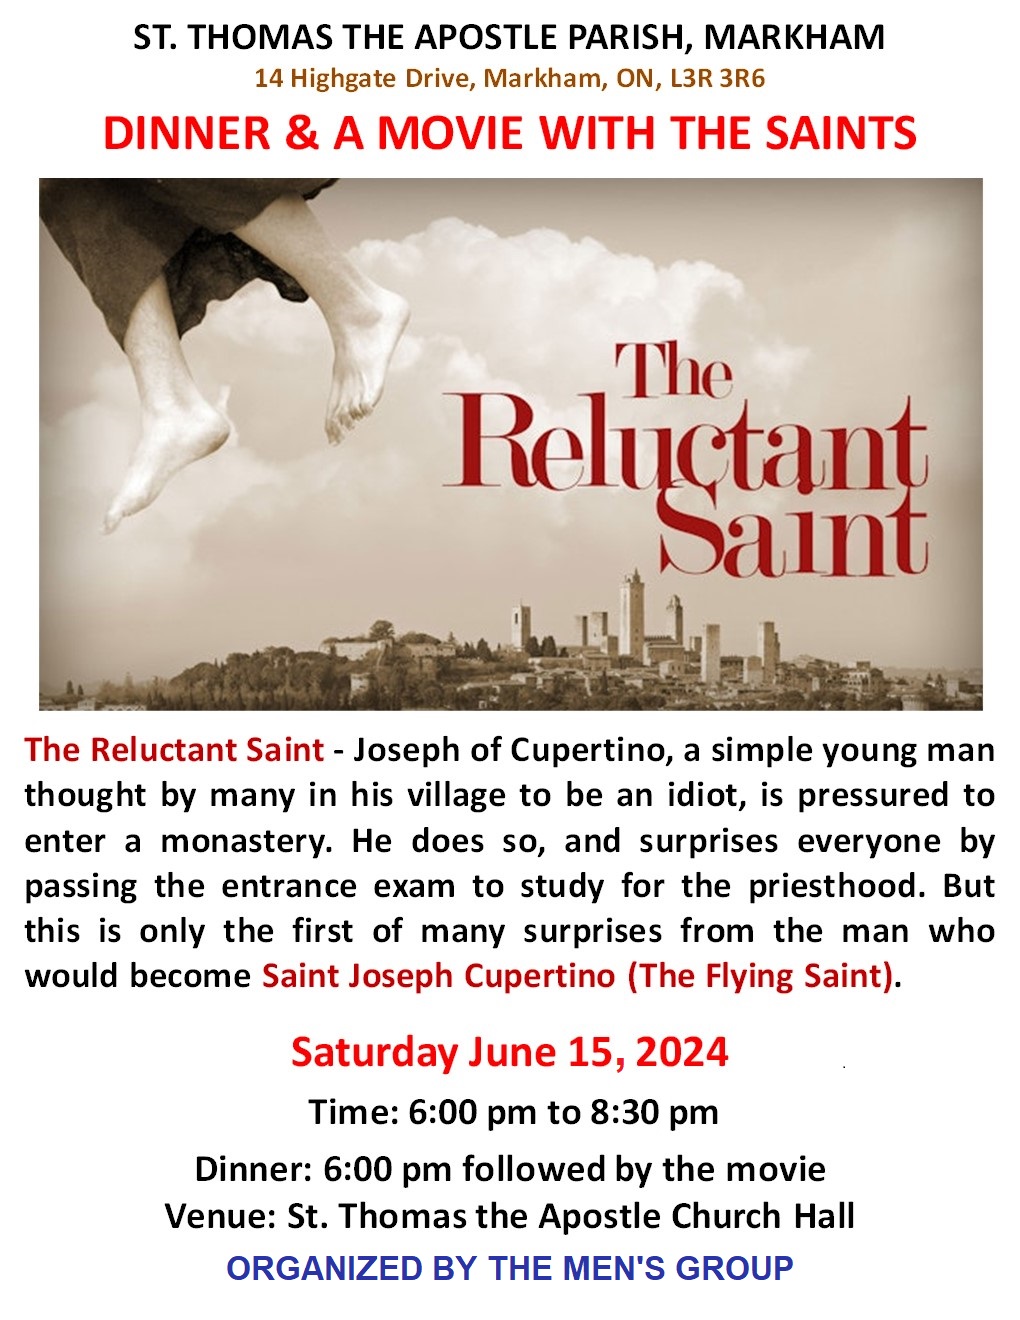 dinner and a movie - the reluctant saint